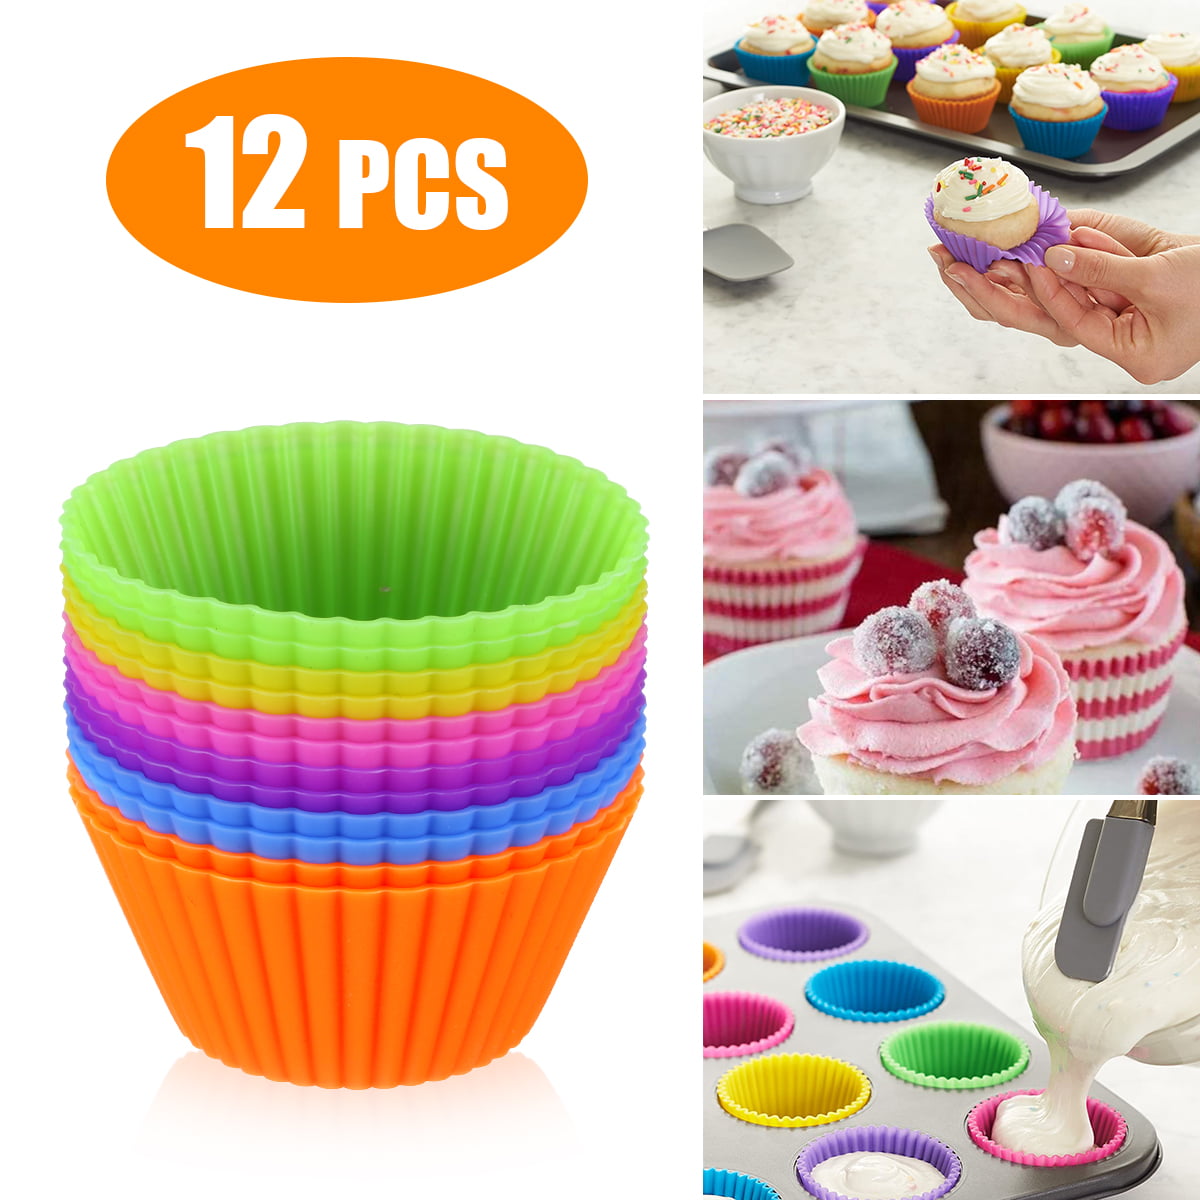 12x Heart Silicone Reusable Muffin Cases,Ideal Cupcakes,Muffins,Chocolate 